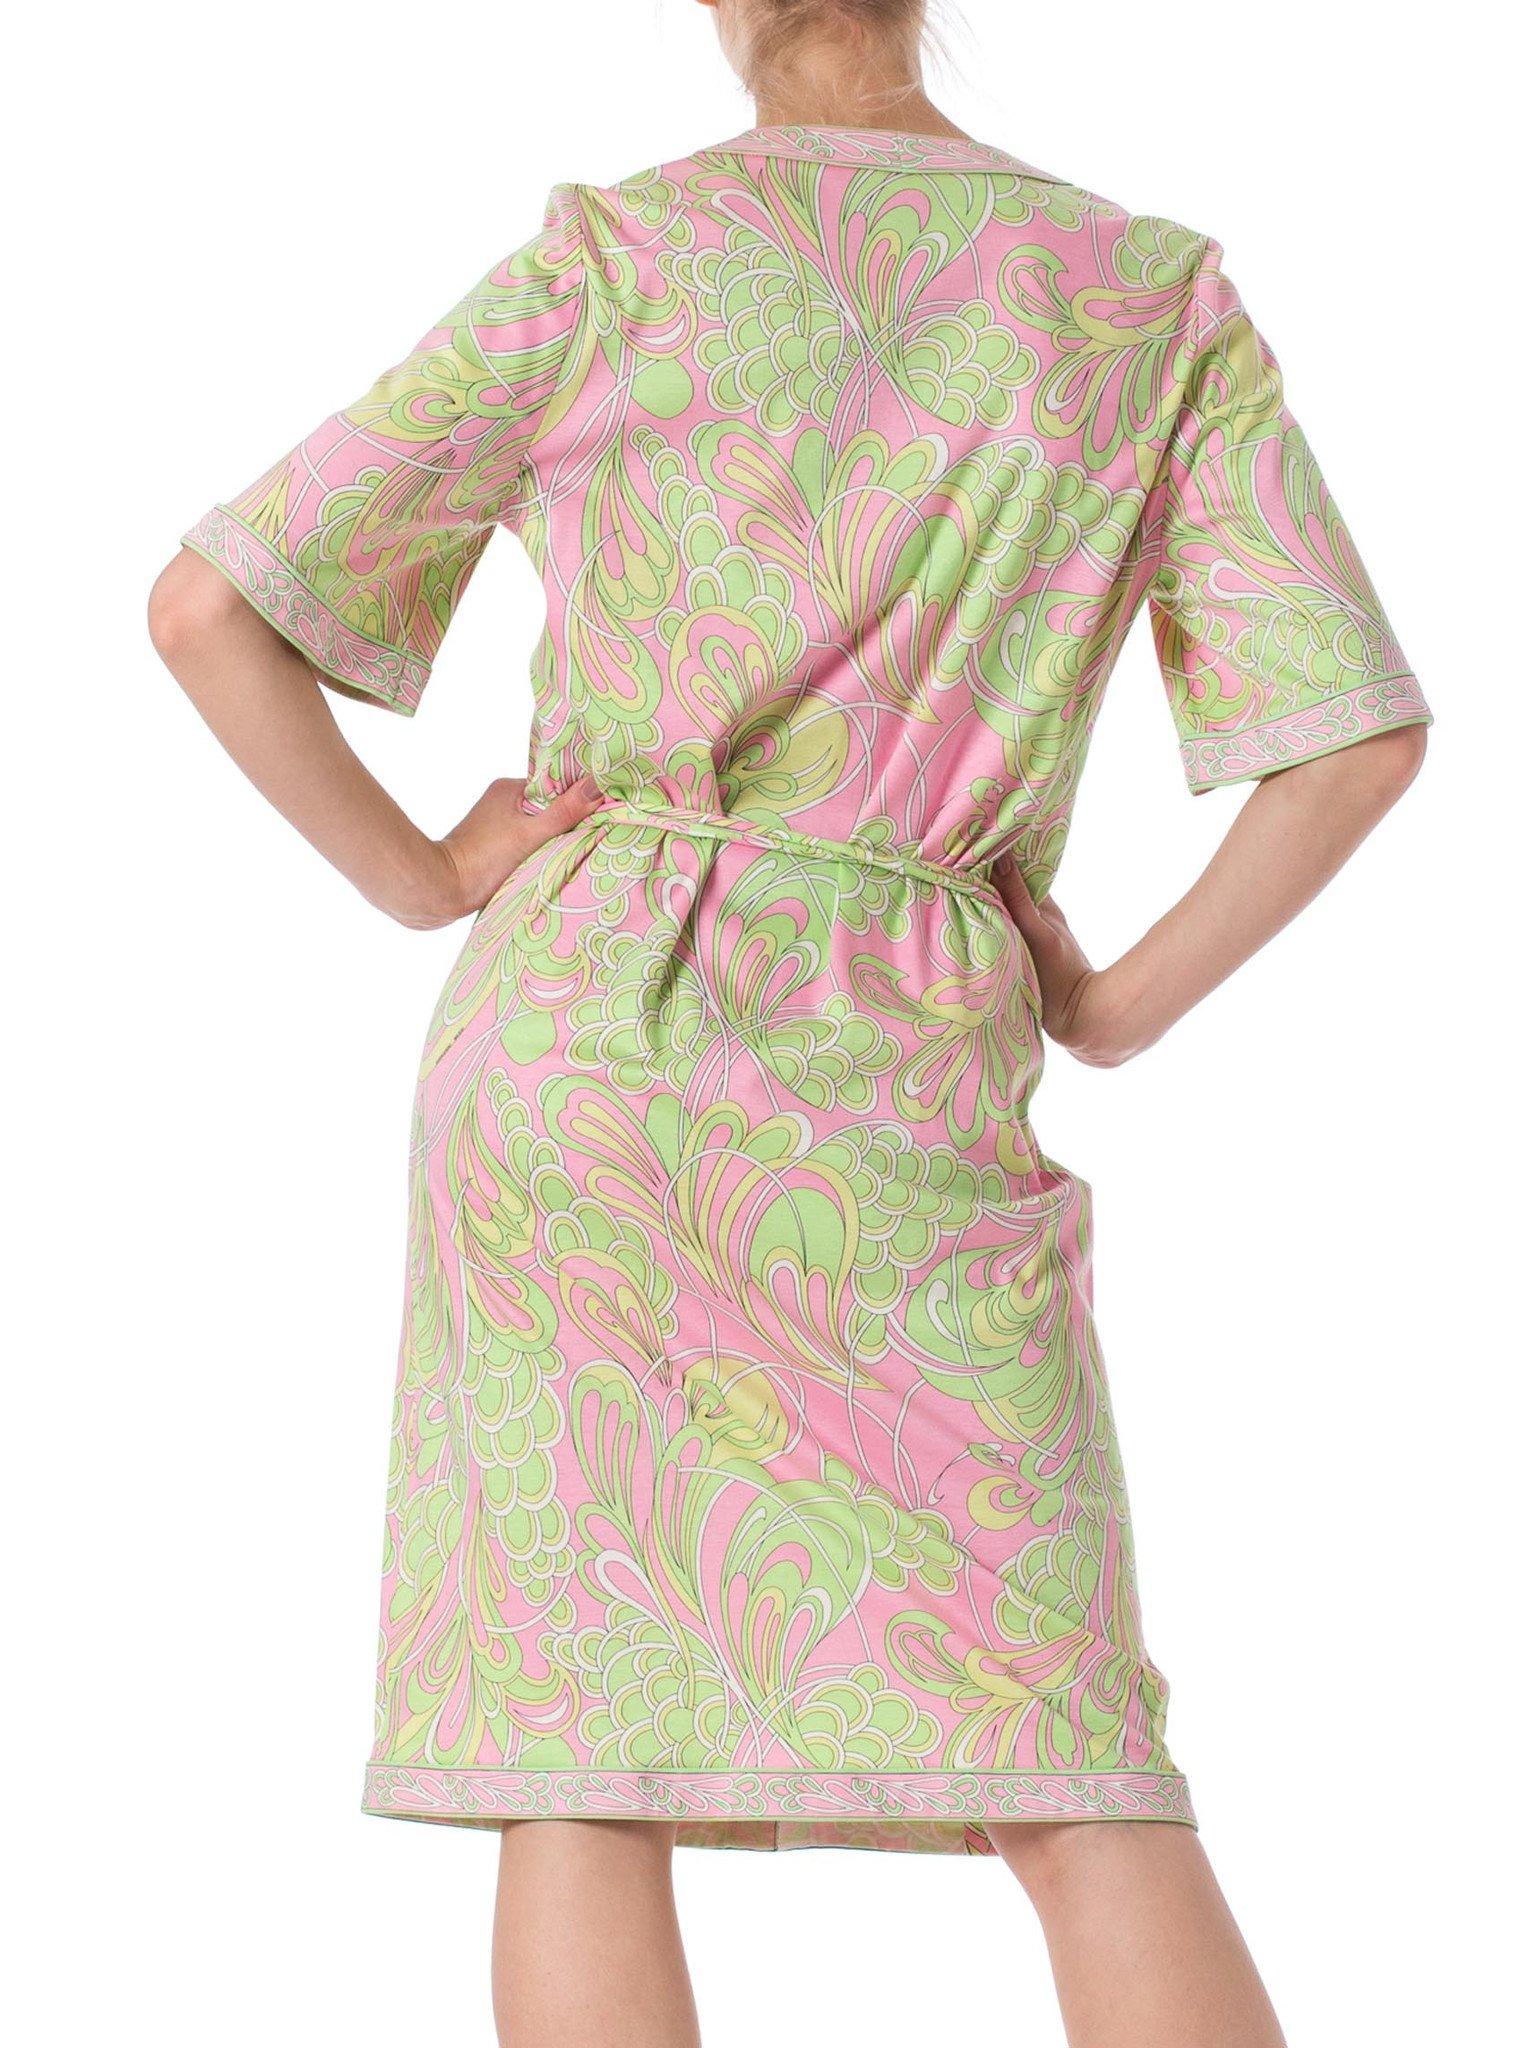 1960S AVERADO BESSI Baby Pink & Green Cotton Jersey Mod Abstract Psychedelic Pr In Excellent Condition For Sale In New York, NY